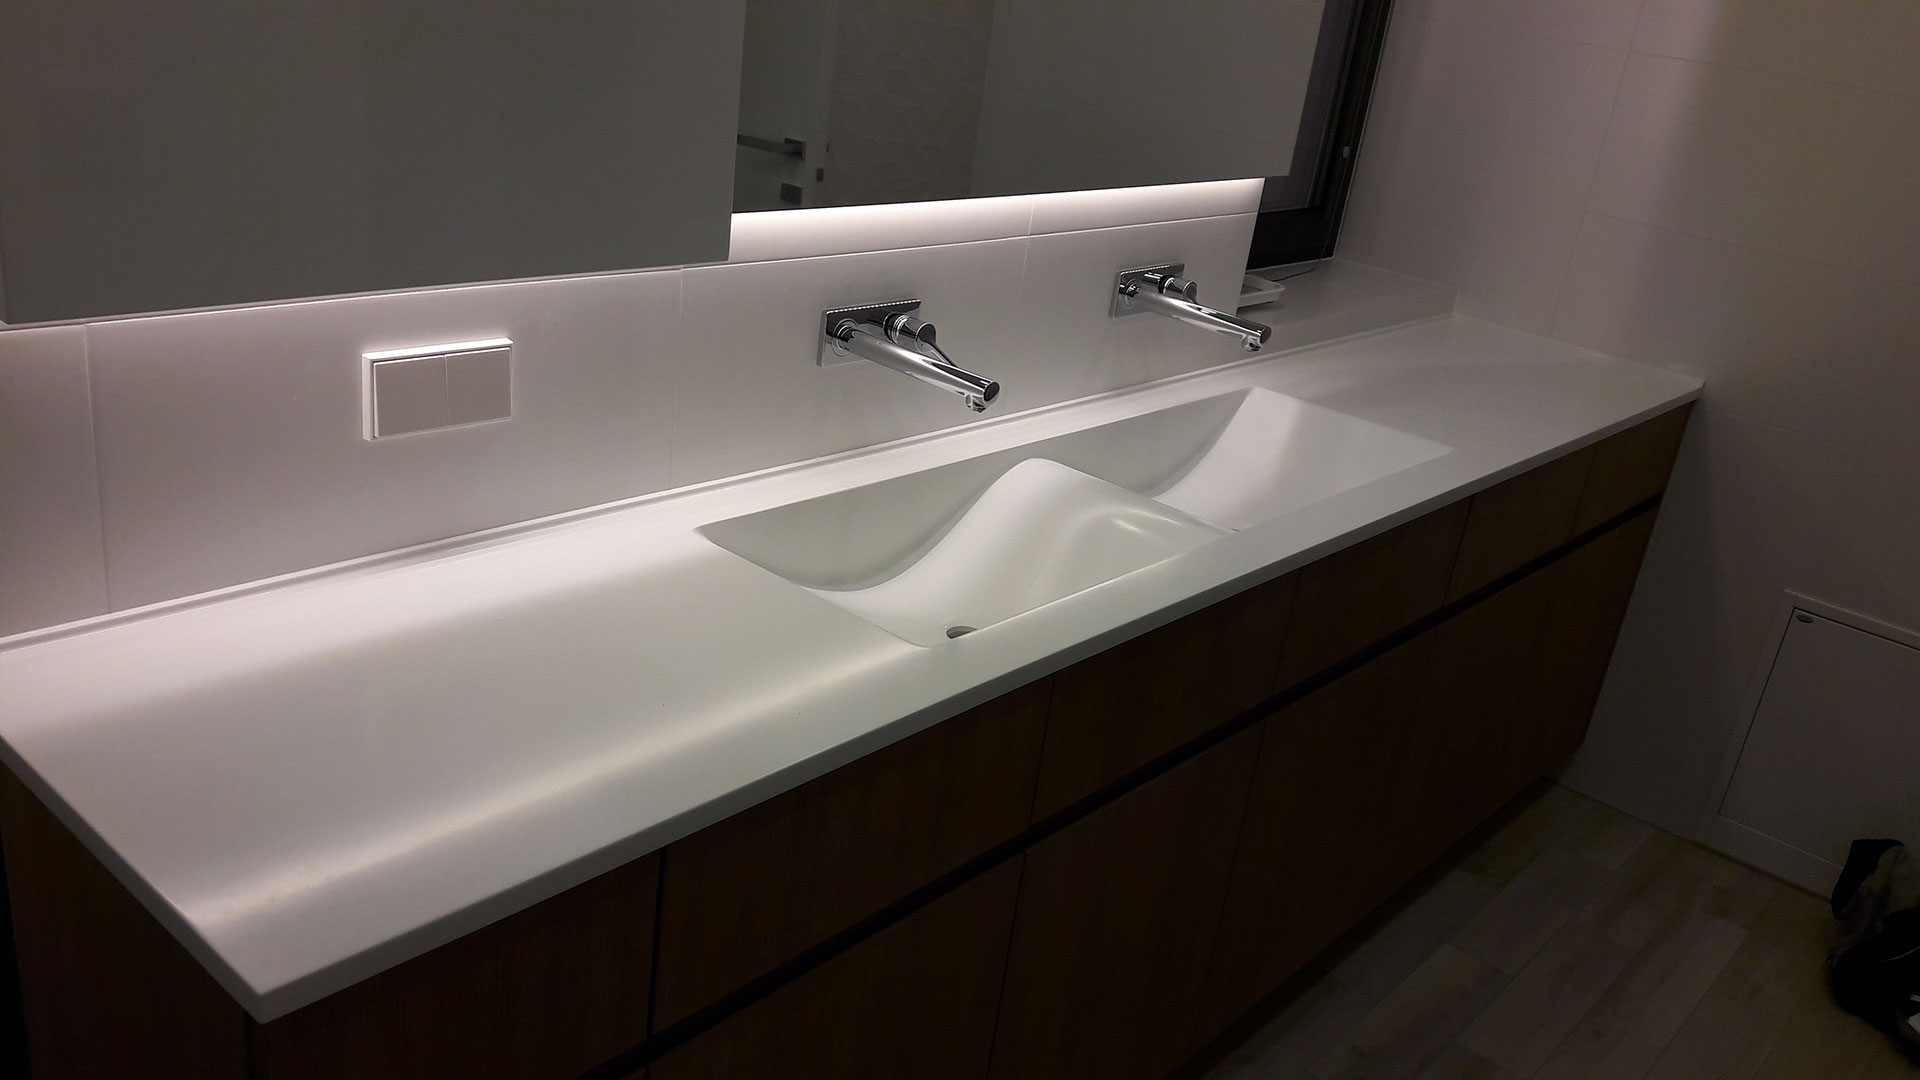 Artificial stone sink in the bathroom